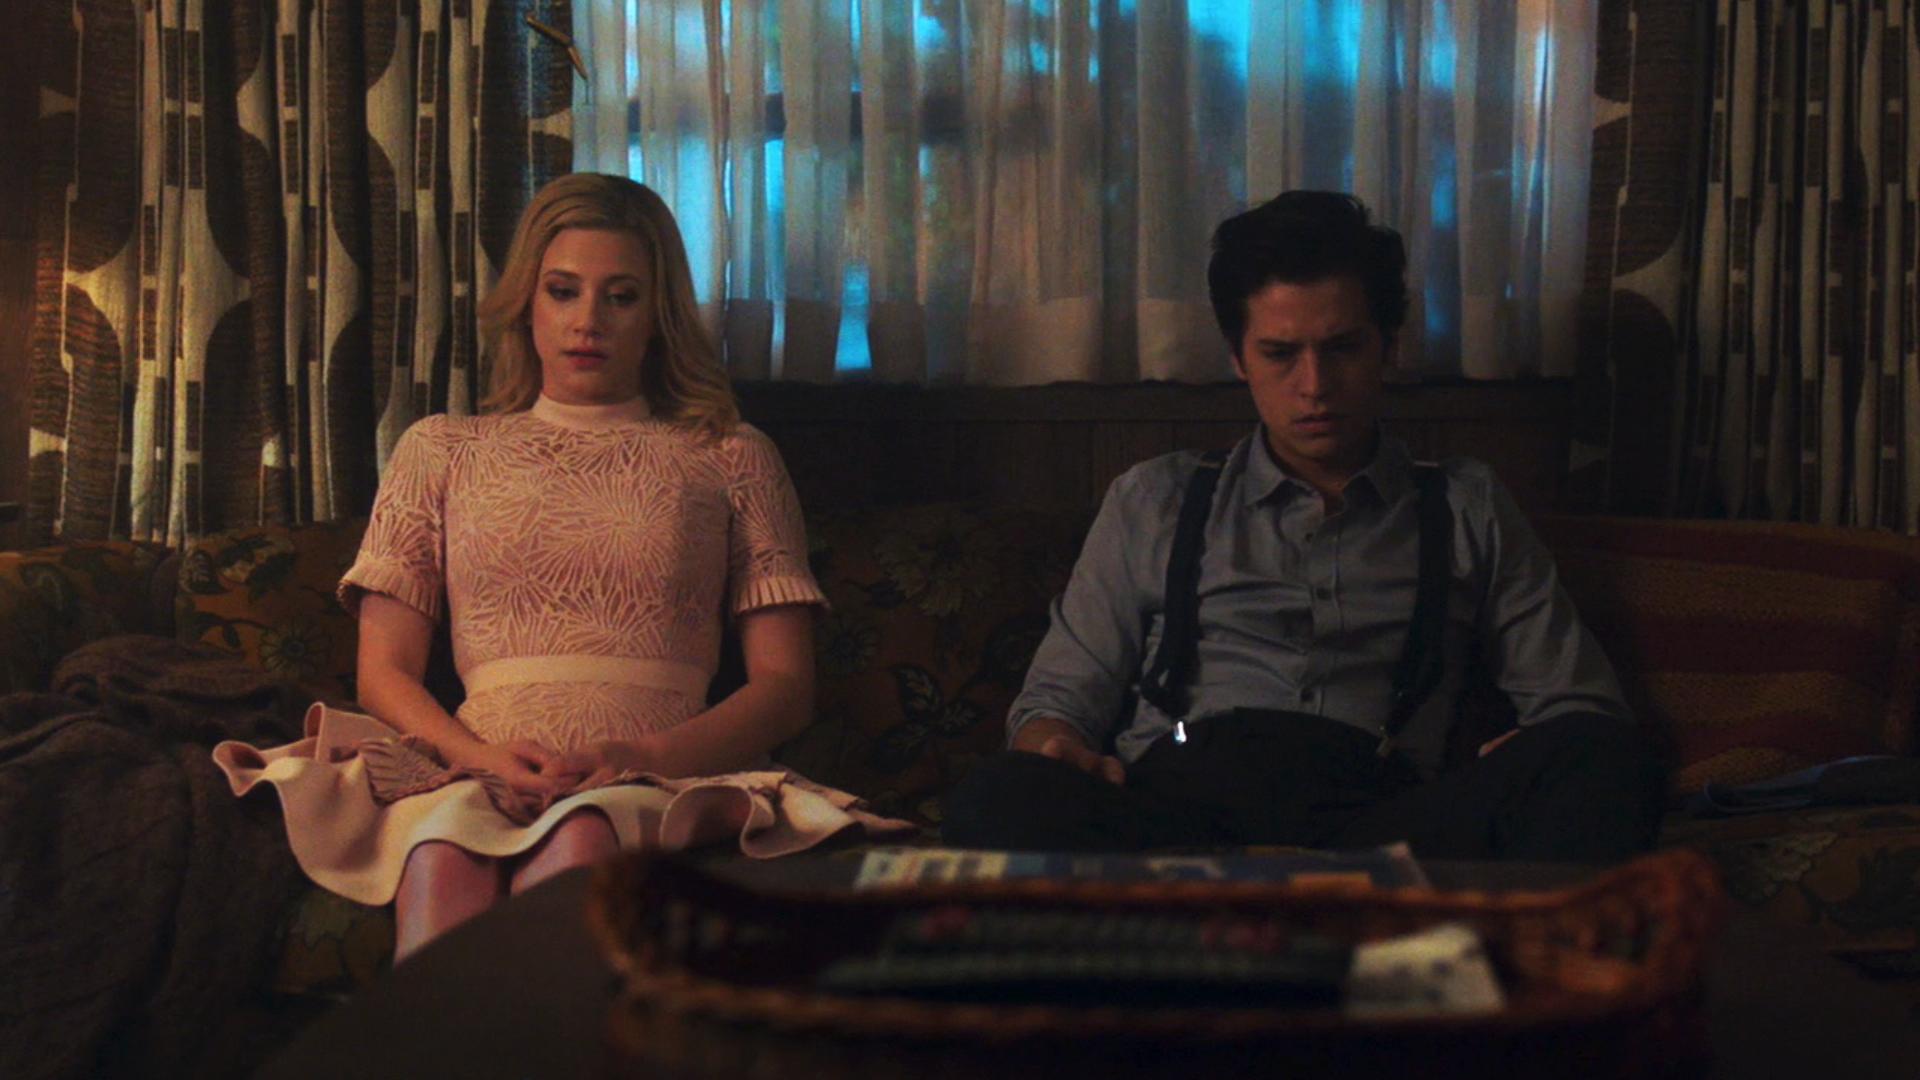 Riverdale – S2E12 “The Wicked and the Divine”